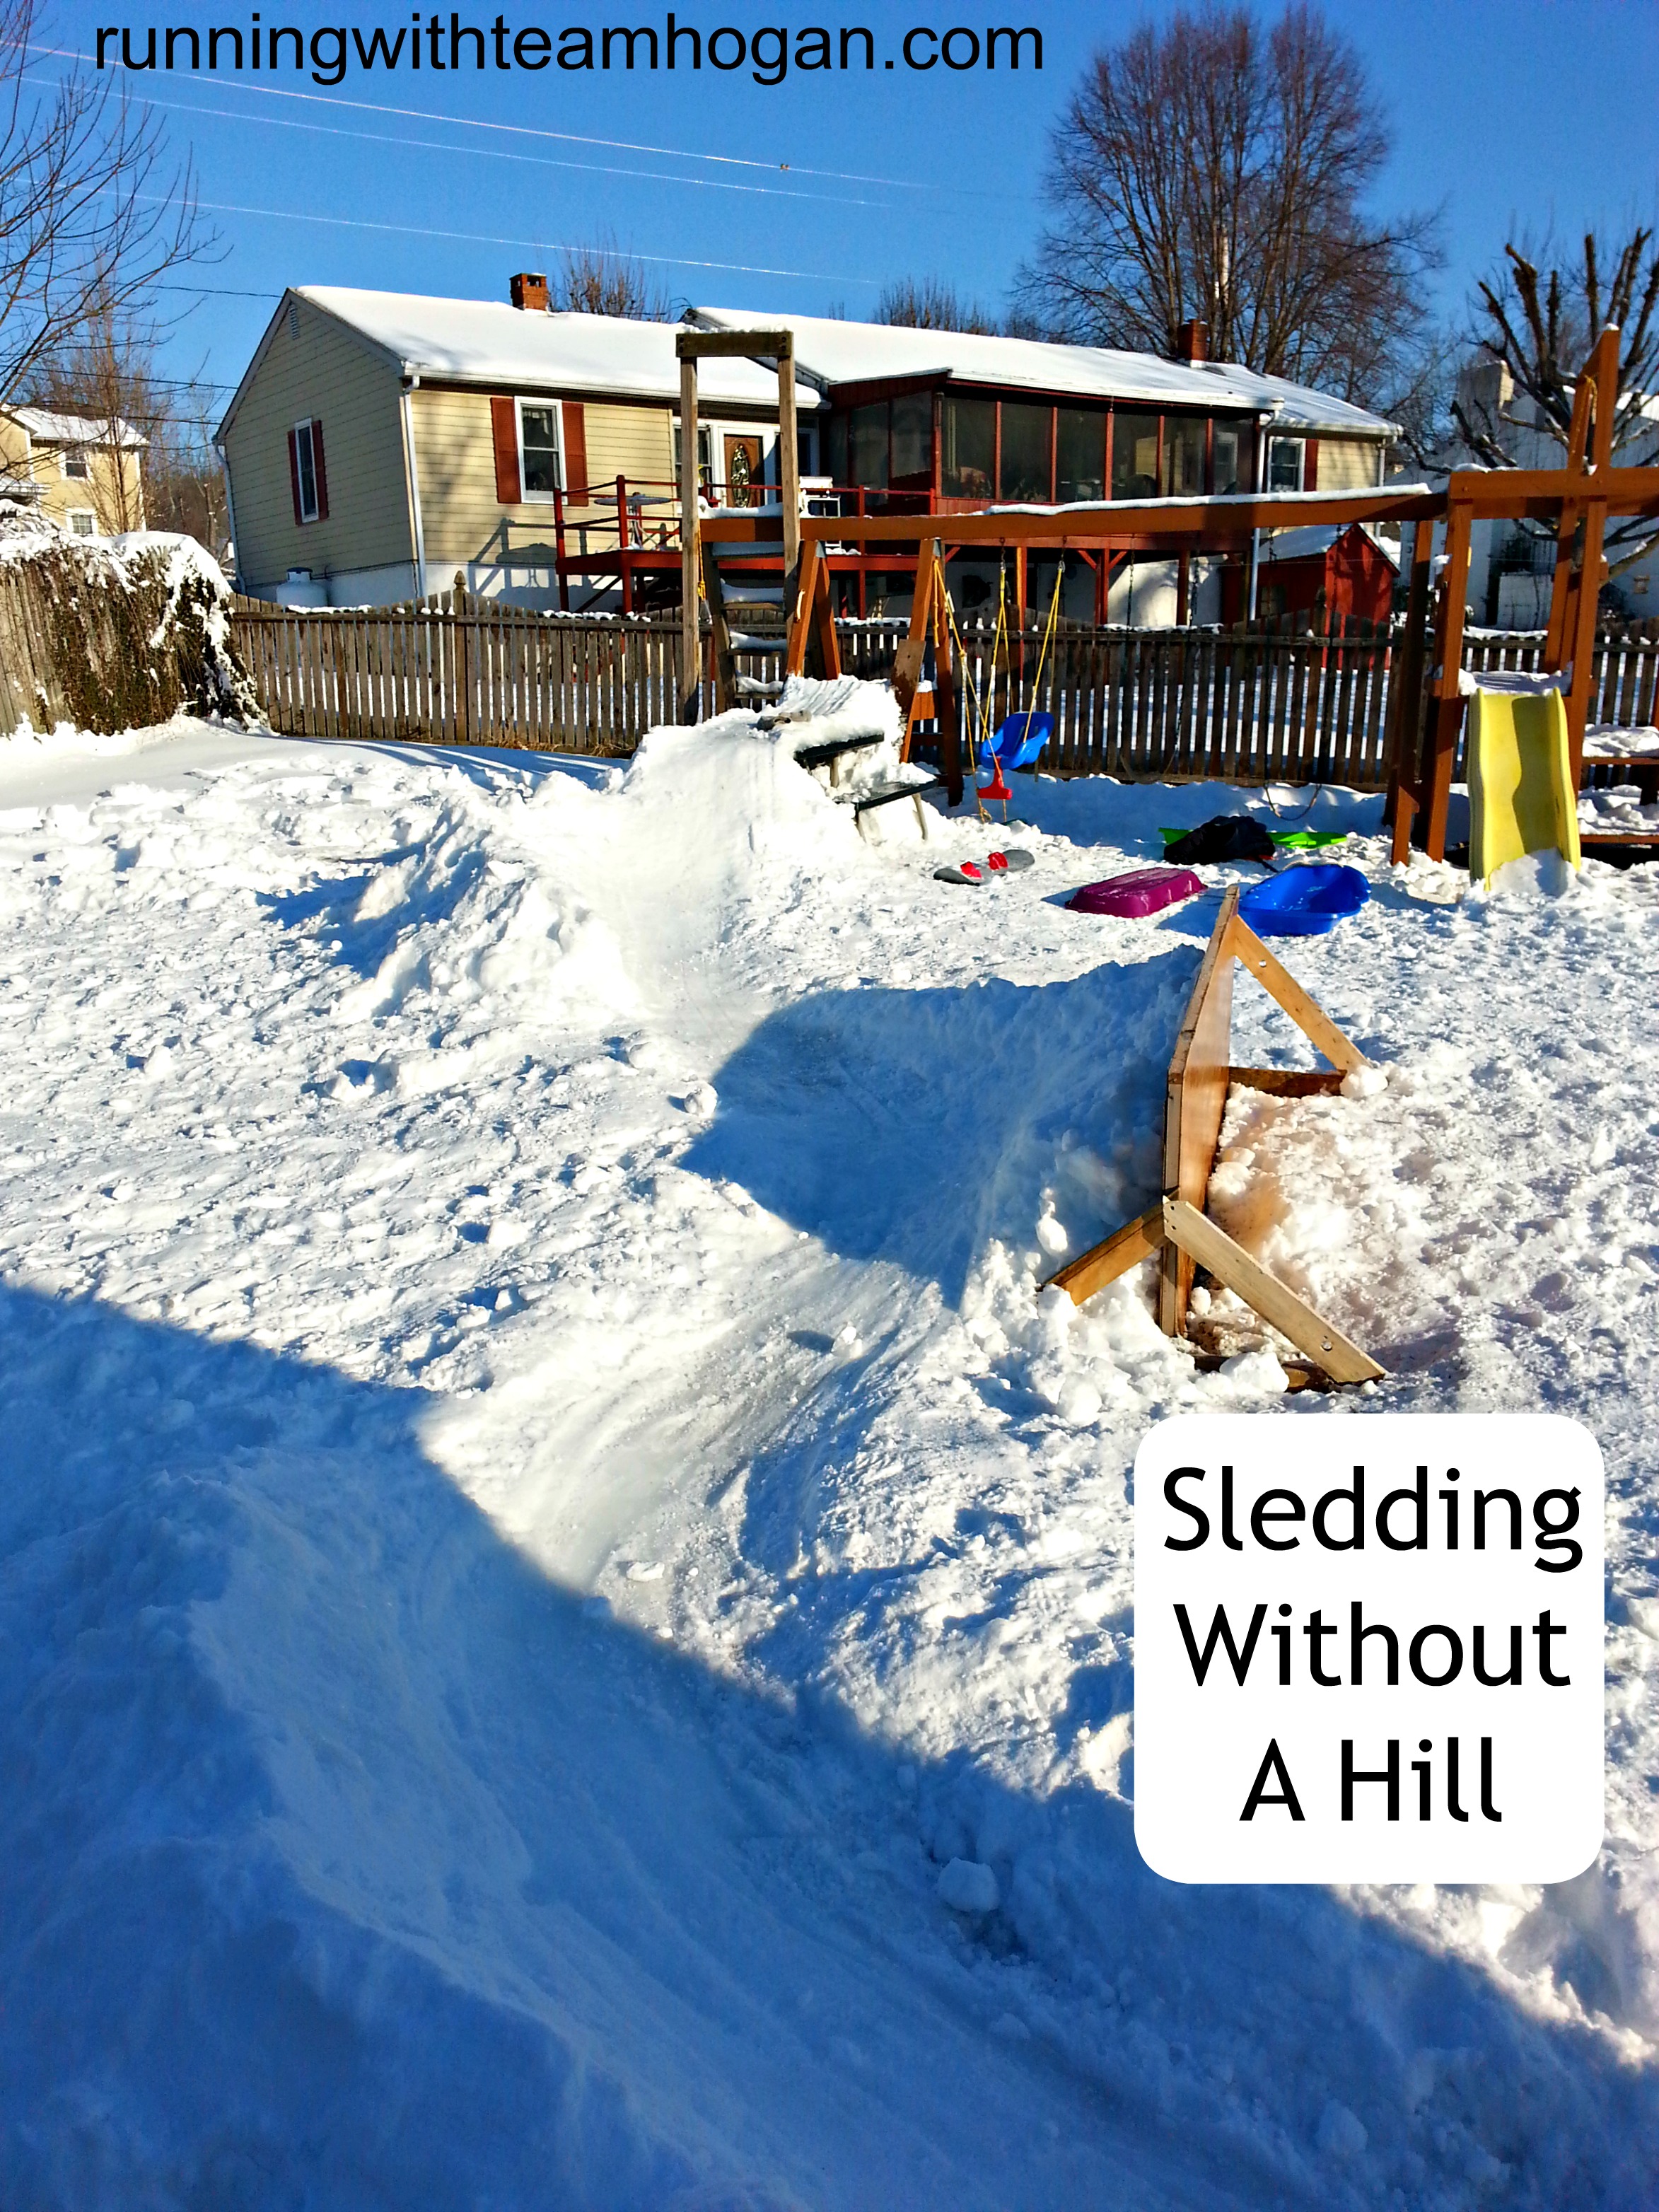 Sledding Without A Hill – Running With Team Hogan